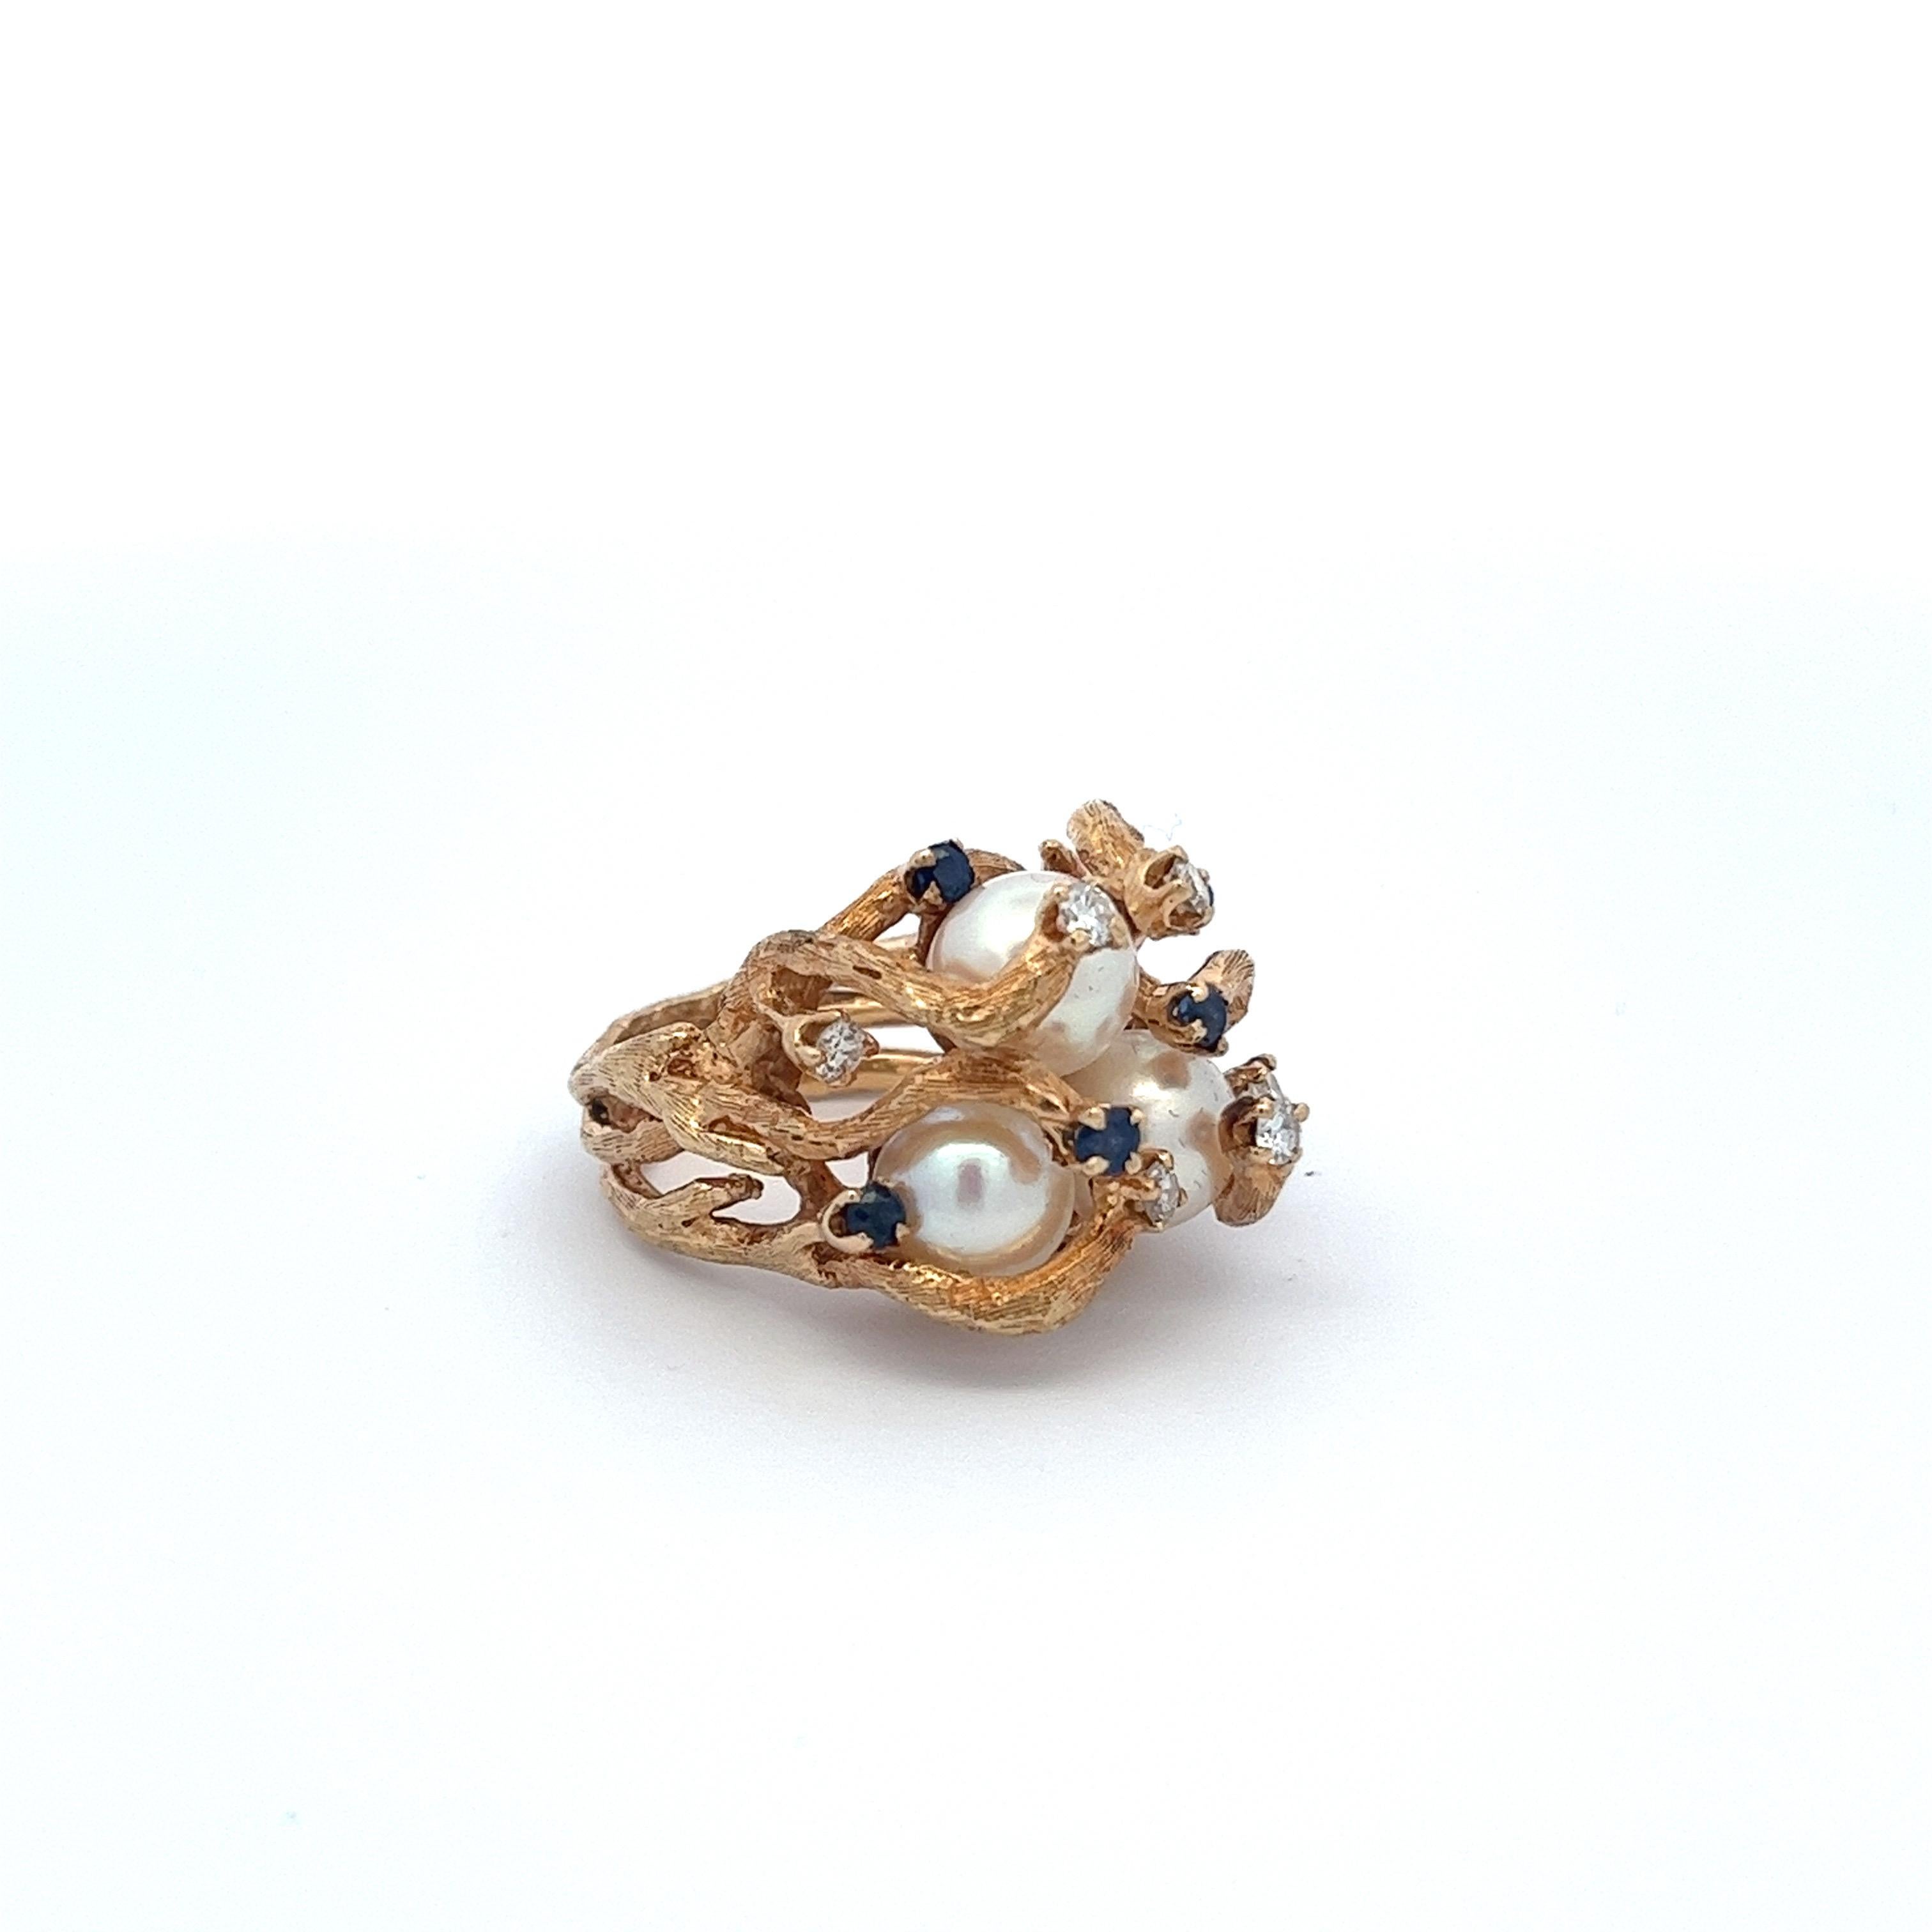 Retro Brutalist 14 Karat Gold Triple Pearl, Diamond, and Sapphire Cocktail Ring For Sale 1